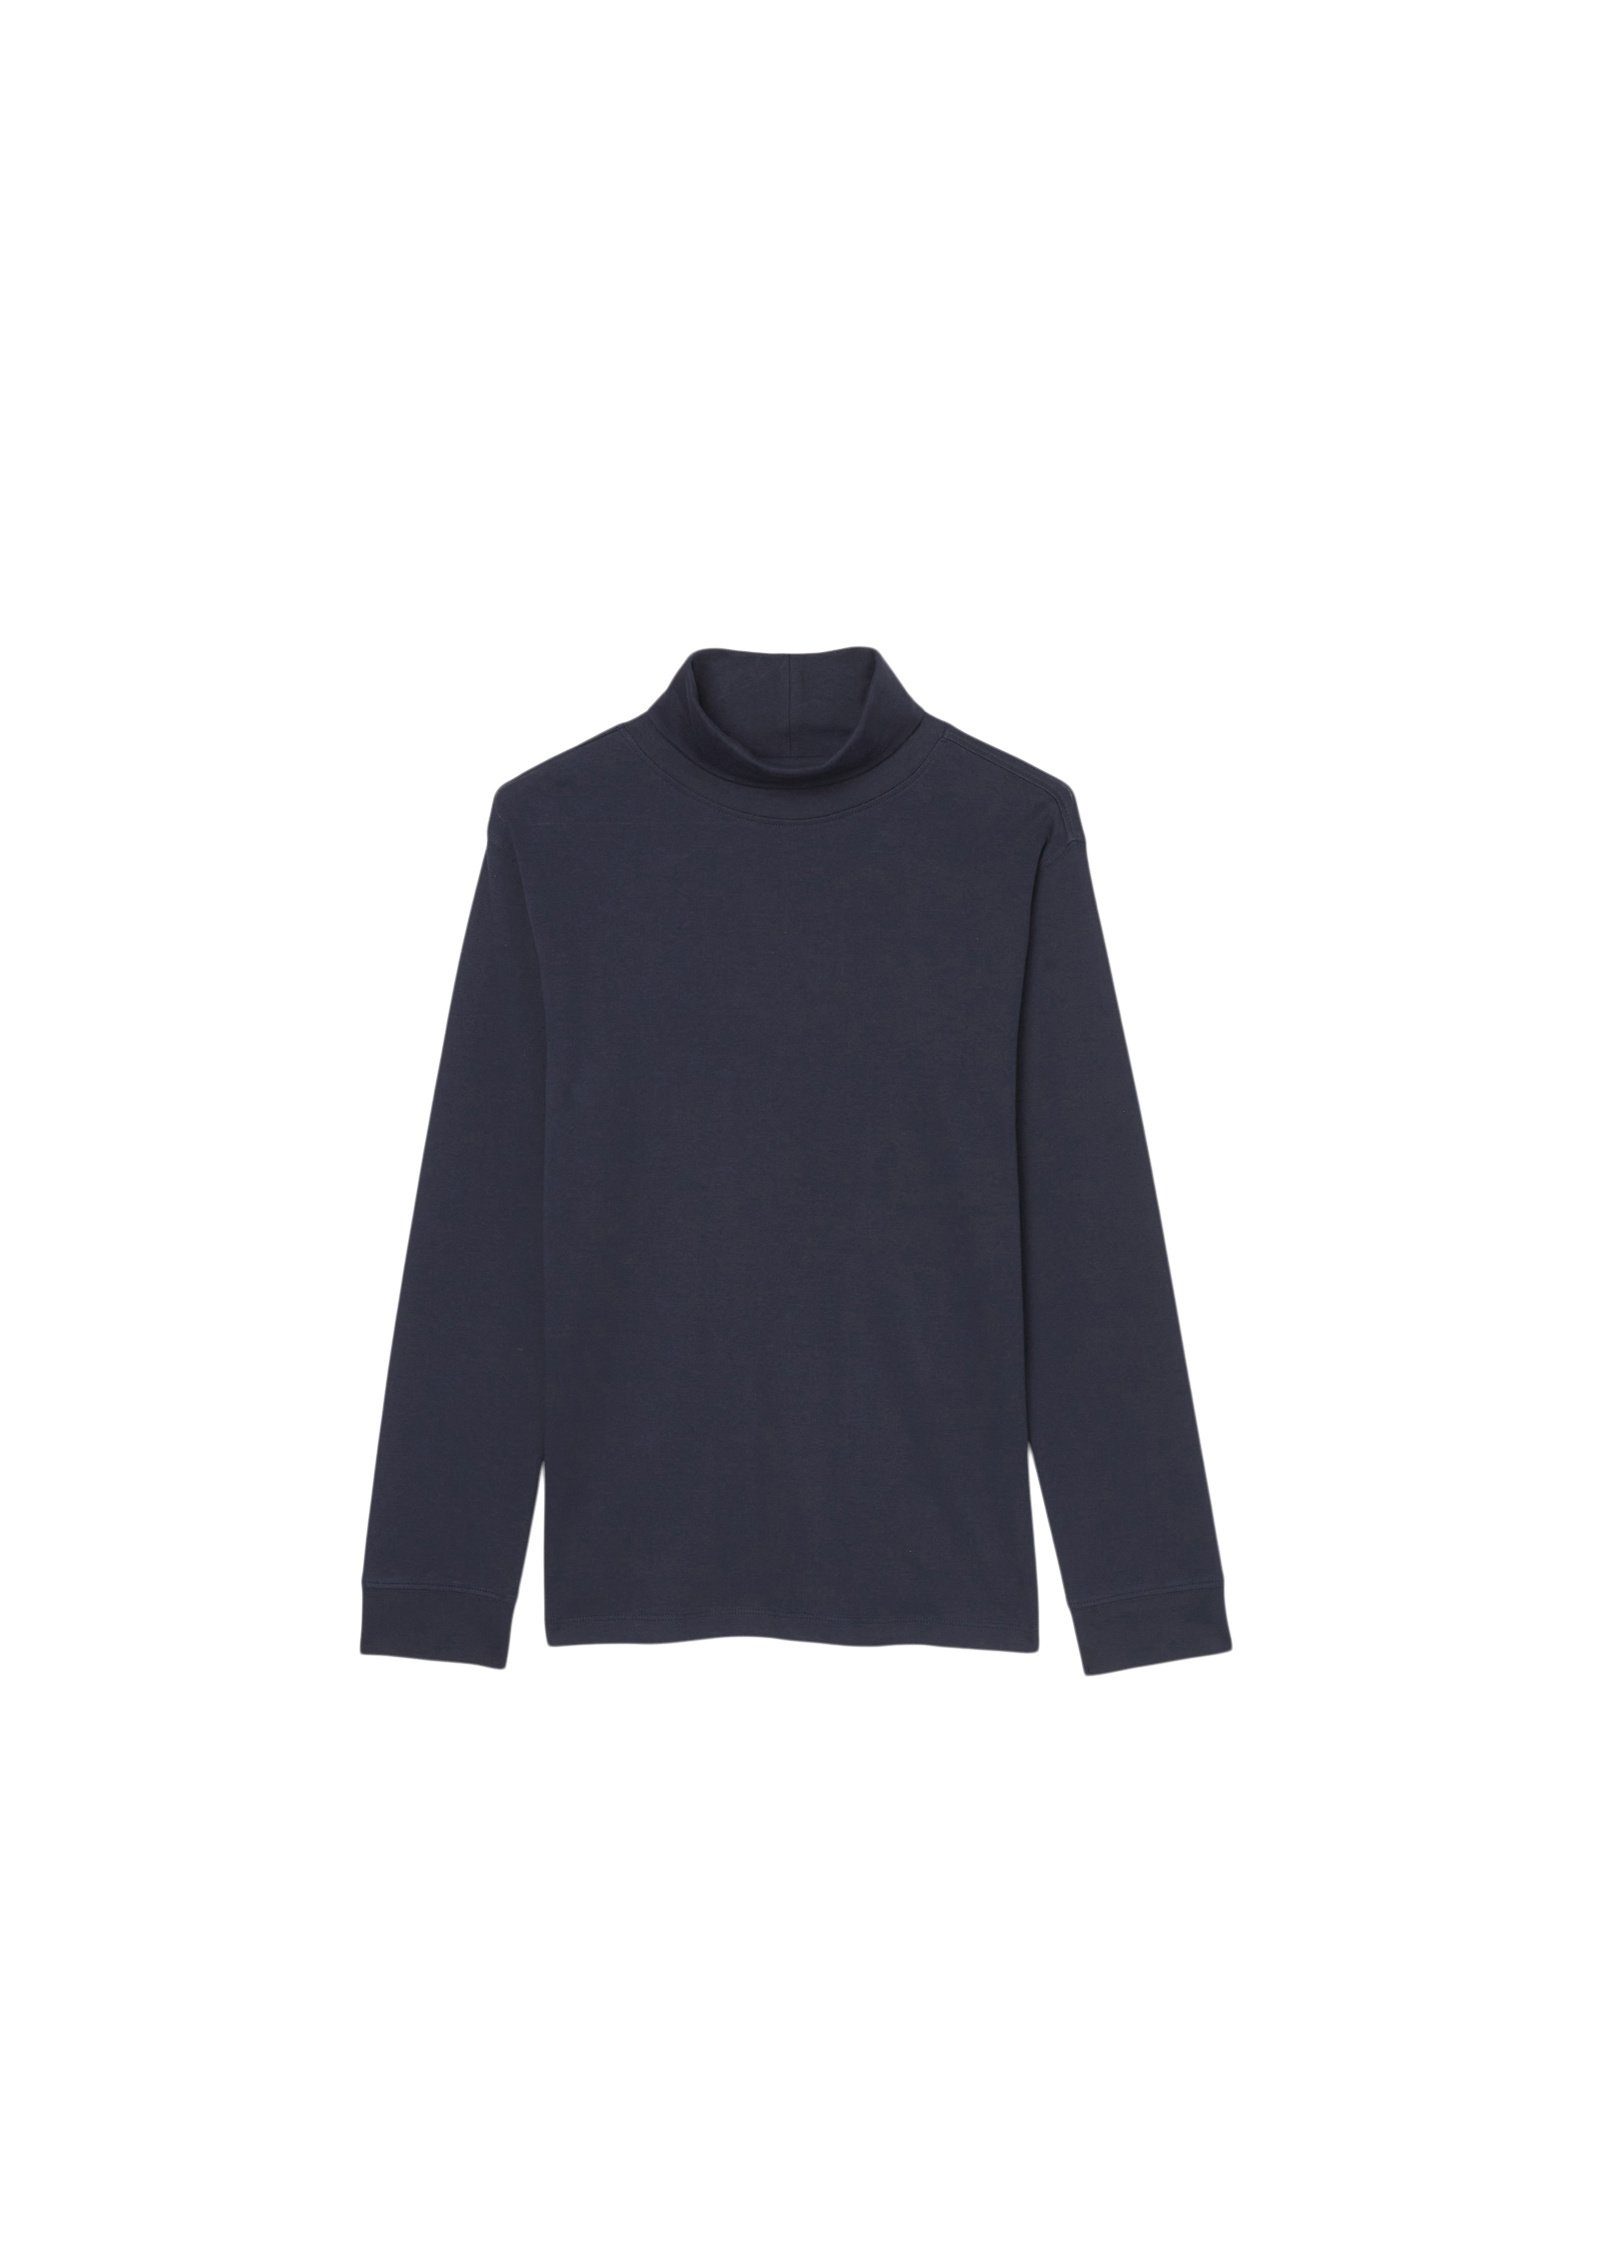 Marc O'Polo Strickpullover in softer blau Jersey-Qualität